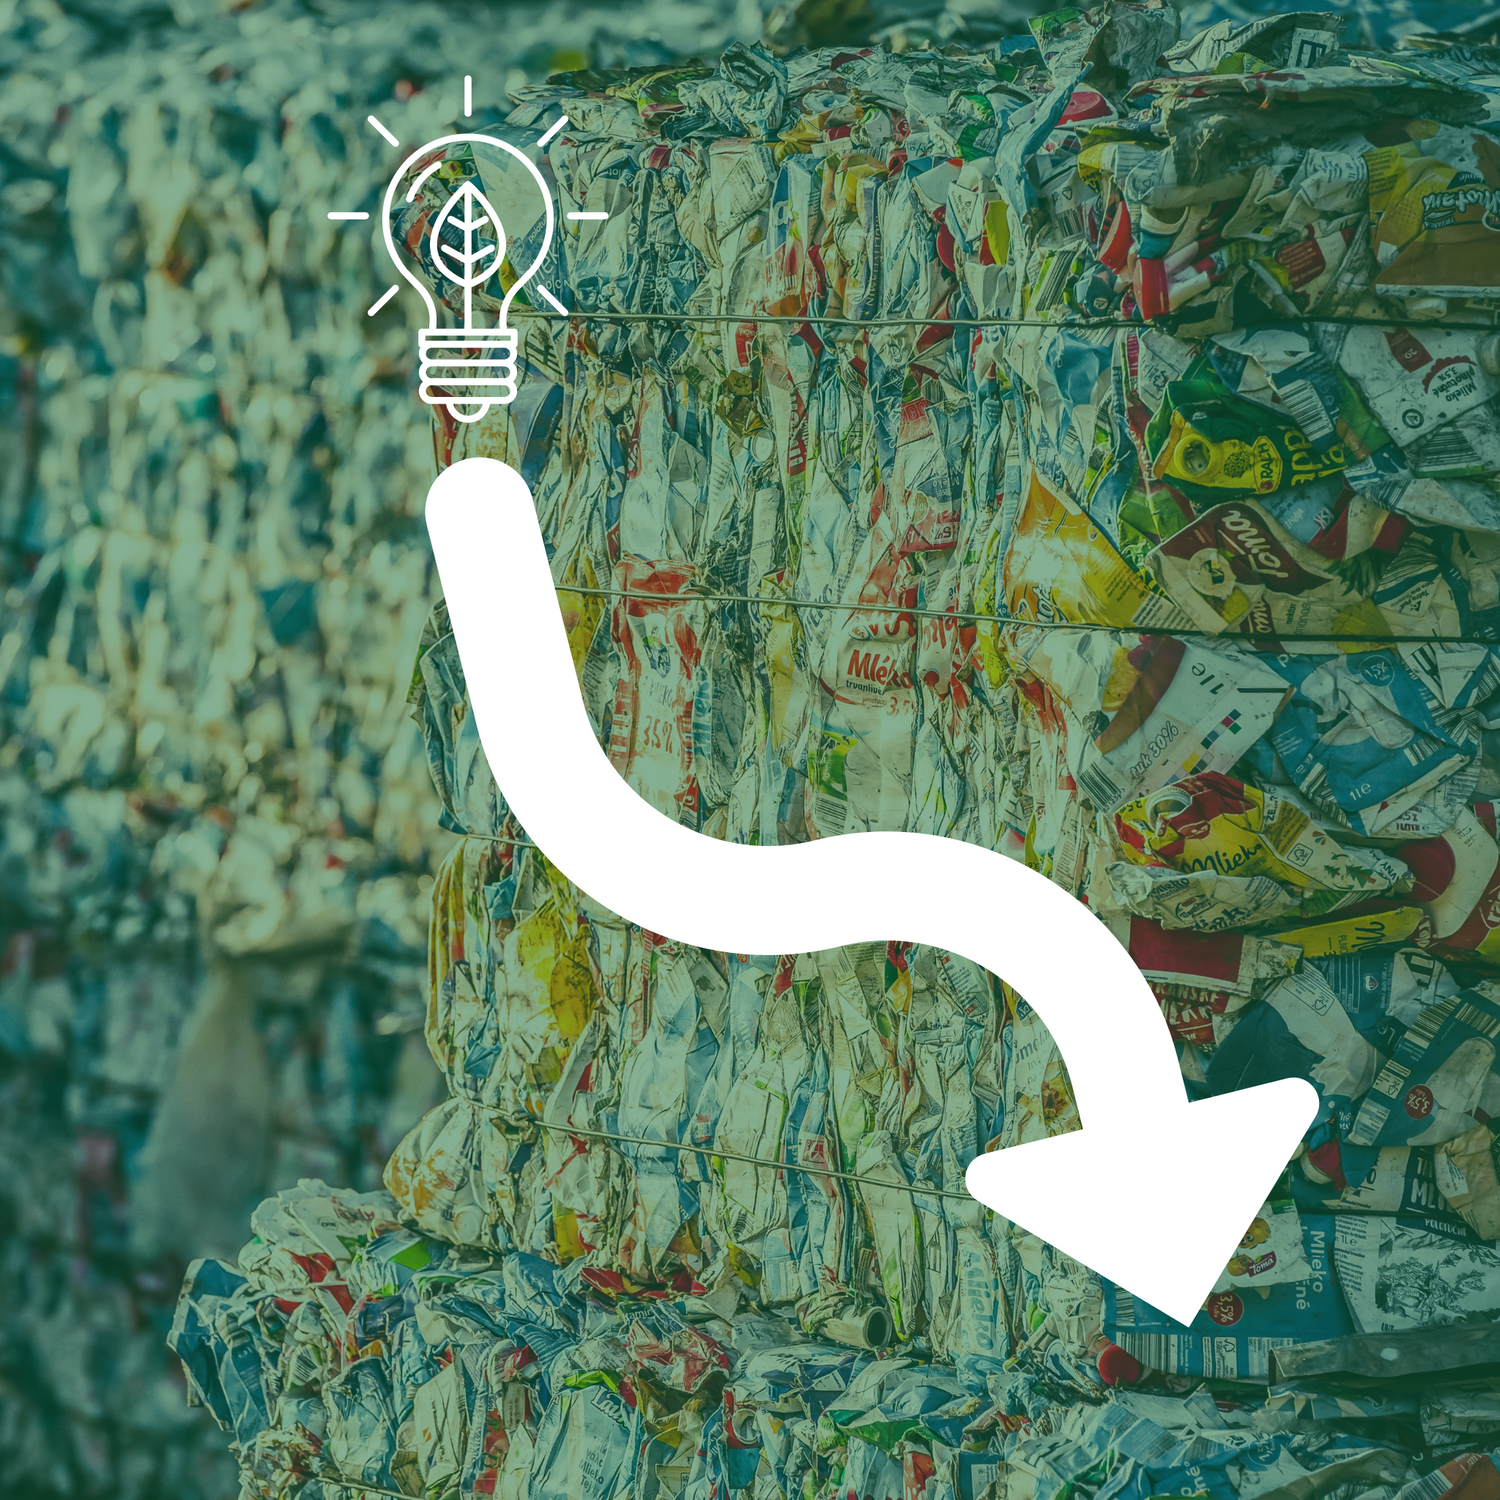 Plastic waste in bales behind a white arrow with a lightbulb at the start.